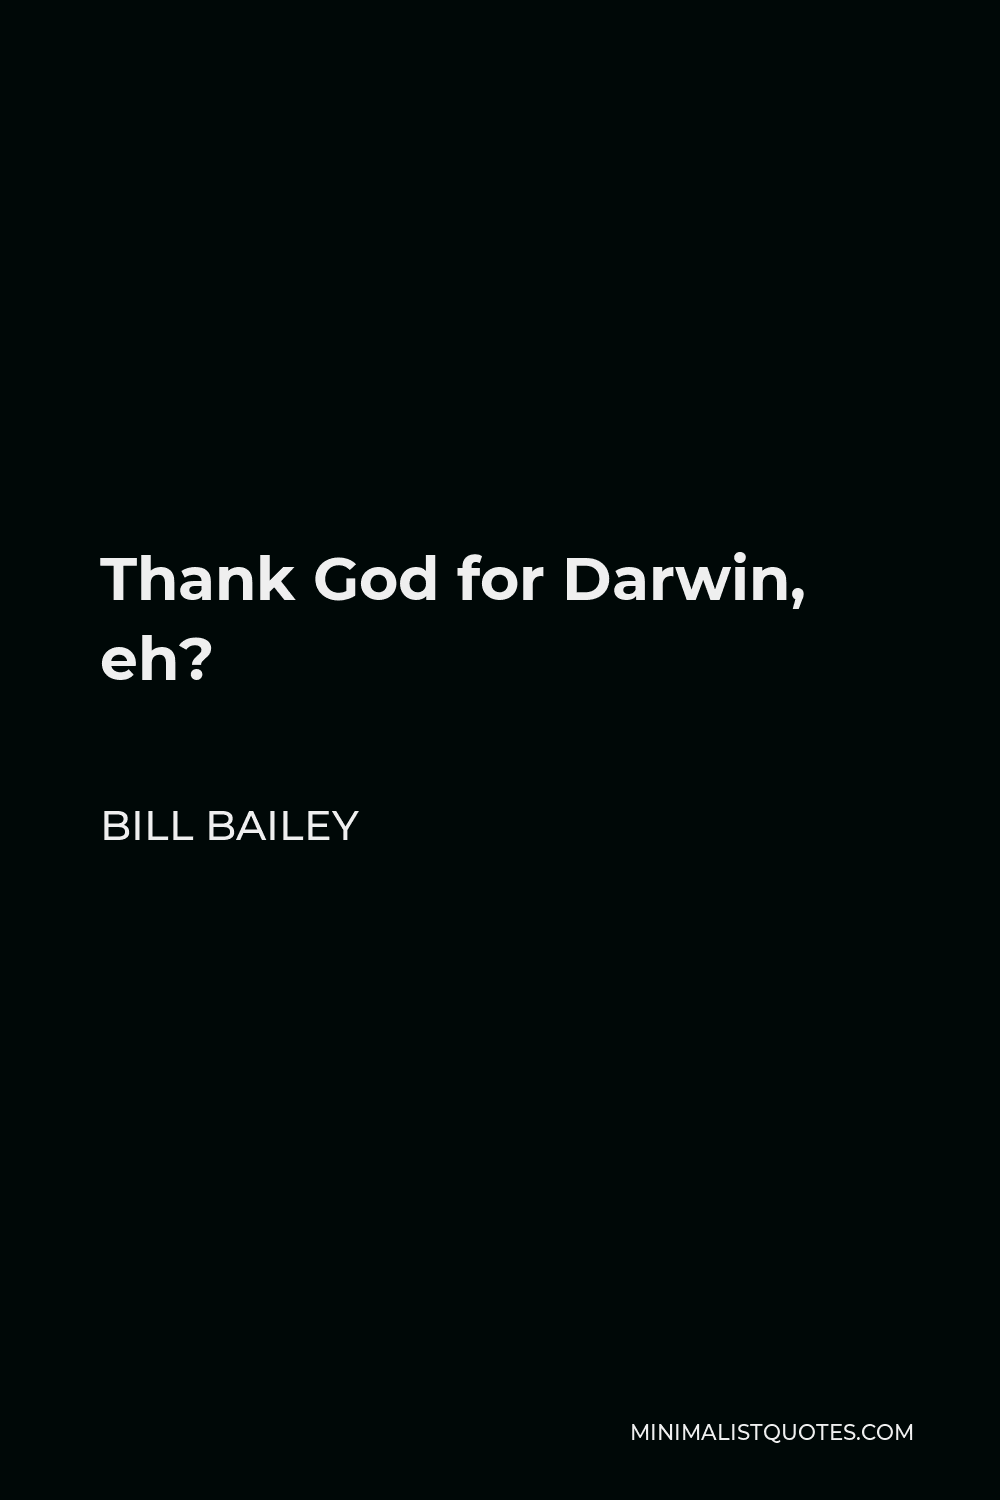 Bill Bailey Quote - Thank God for Darwin, eh?